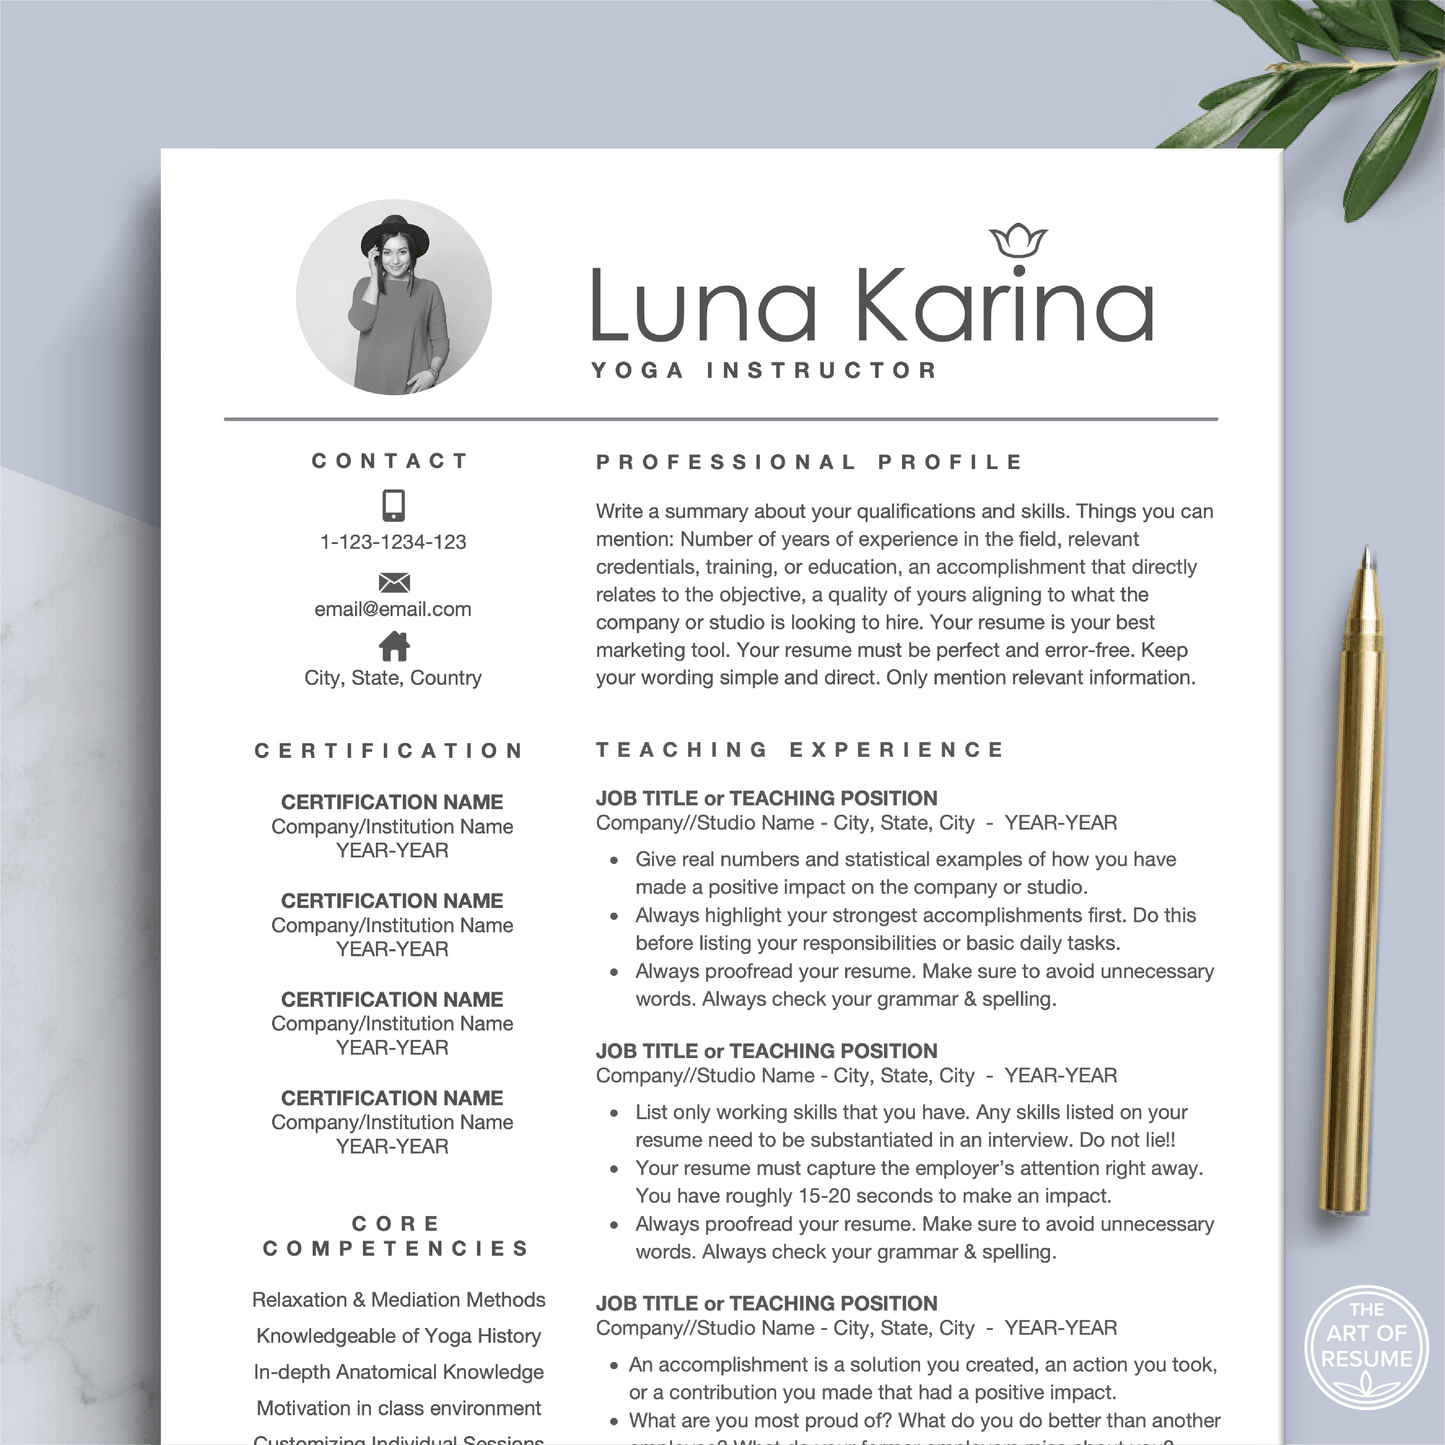 The Art of Resume Templates | Professional Yoga, Fitness, Wellness, Designer Resume CV Template | Curriculum Vitae for Apple Pages, Microsoft Word, Mac, PC